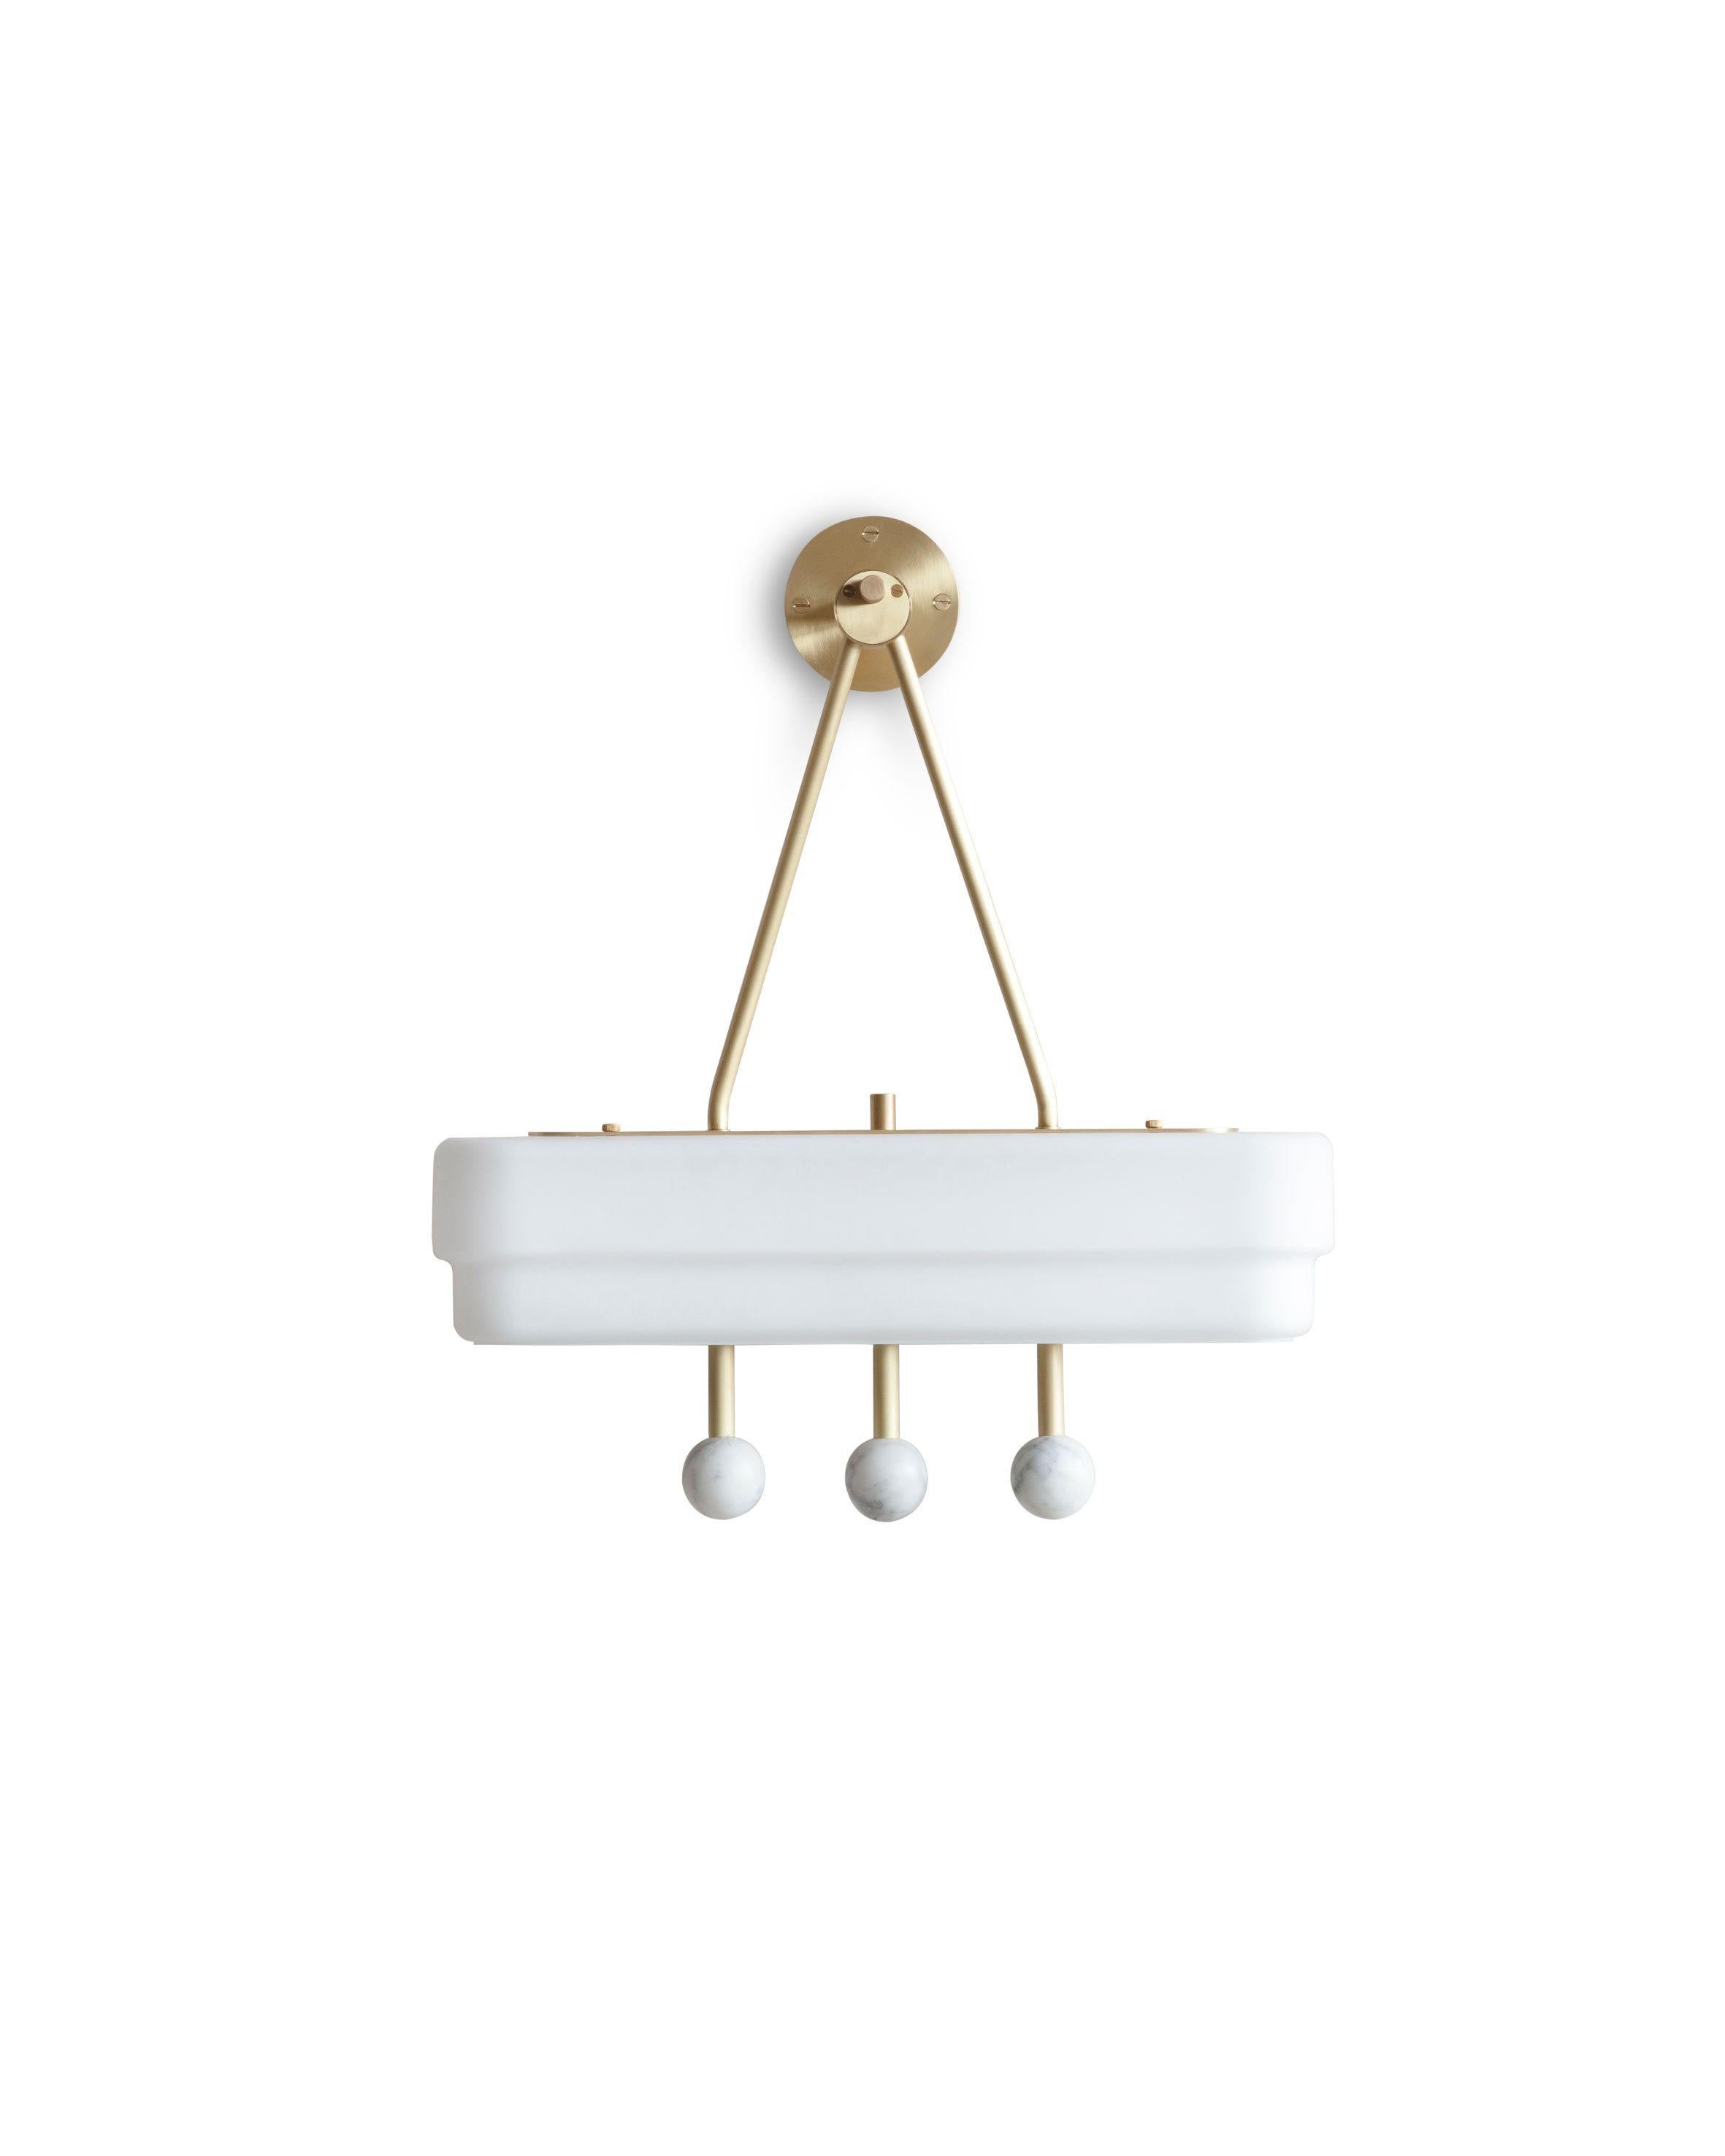 White Spate wall light by Bert Frank
Dimensions: H 47 x W 44 x D 13.6 cm
Materials: Brass, marble, glass

Available finishes: Bronzed brass, black brass
All our lamps can be wired according to each country. If sold to the USA it will be wired